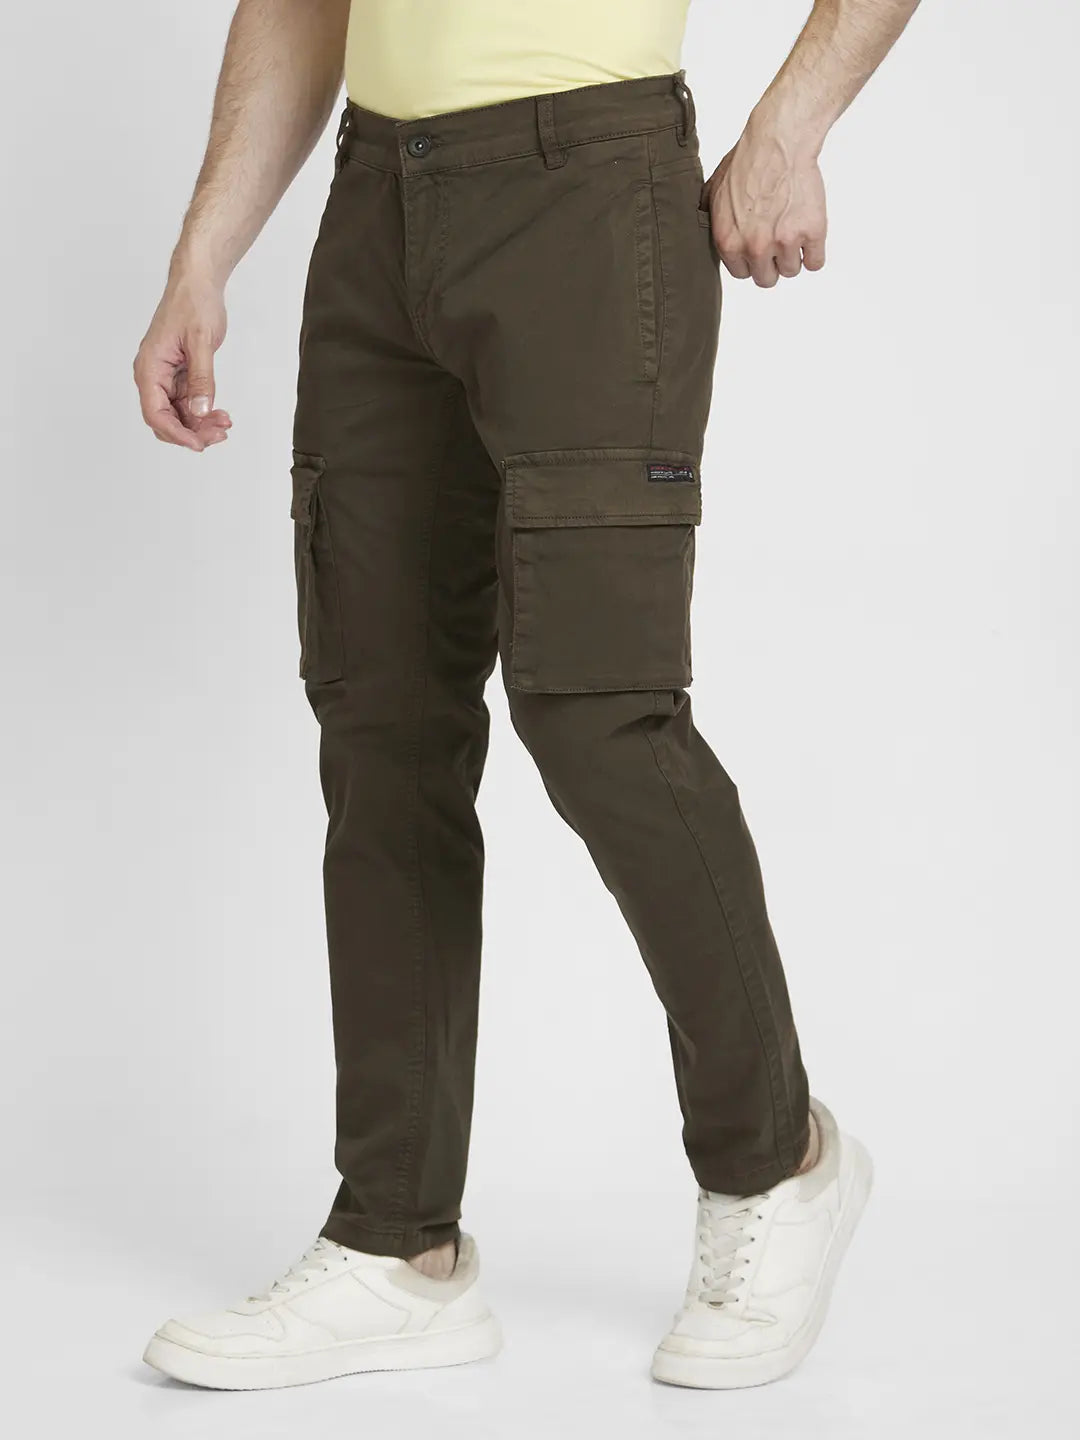 Buy SPYKAR Cargo Trousers & Pants online - 1 products | FASHIOLA INDIA